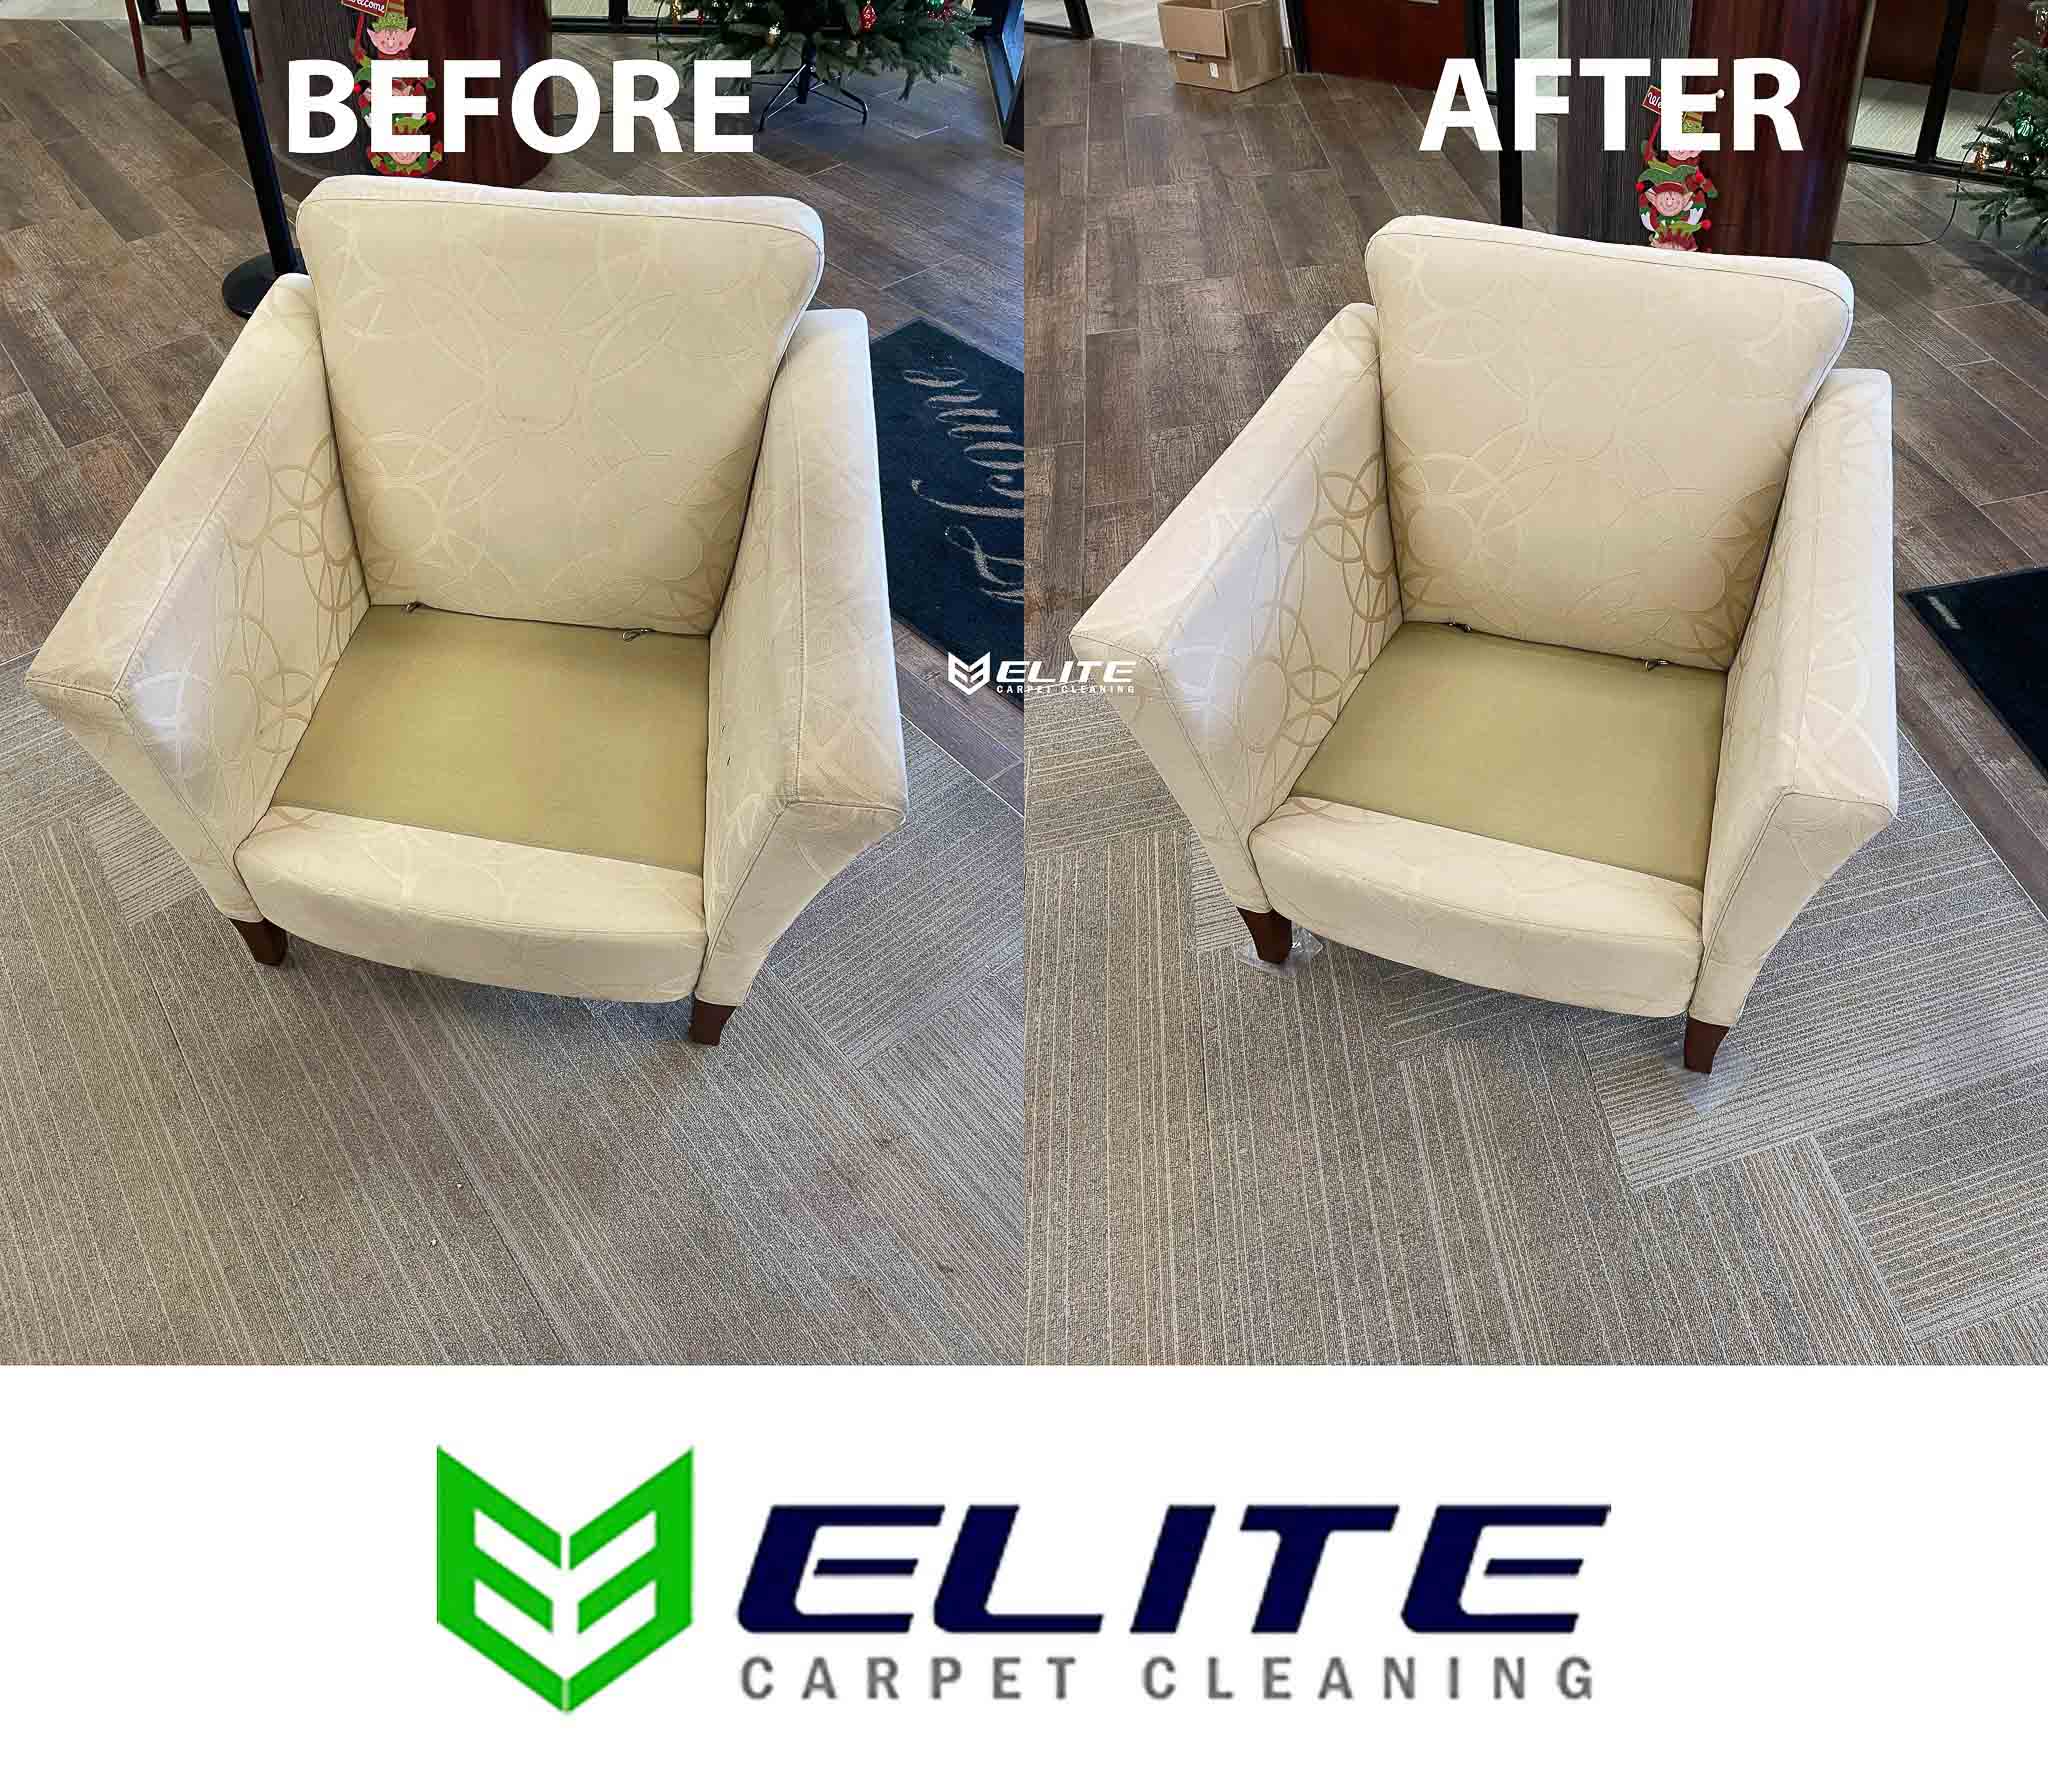 White Chair with clean upholstery in Fort Stockton tx. This chair was cleaned by Elite Carpet cleaning.